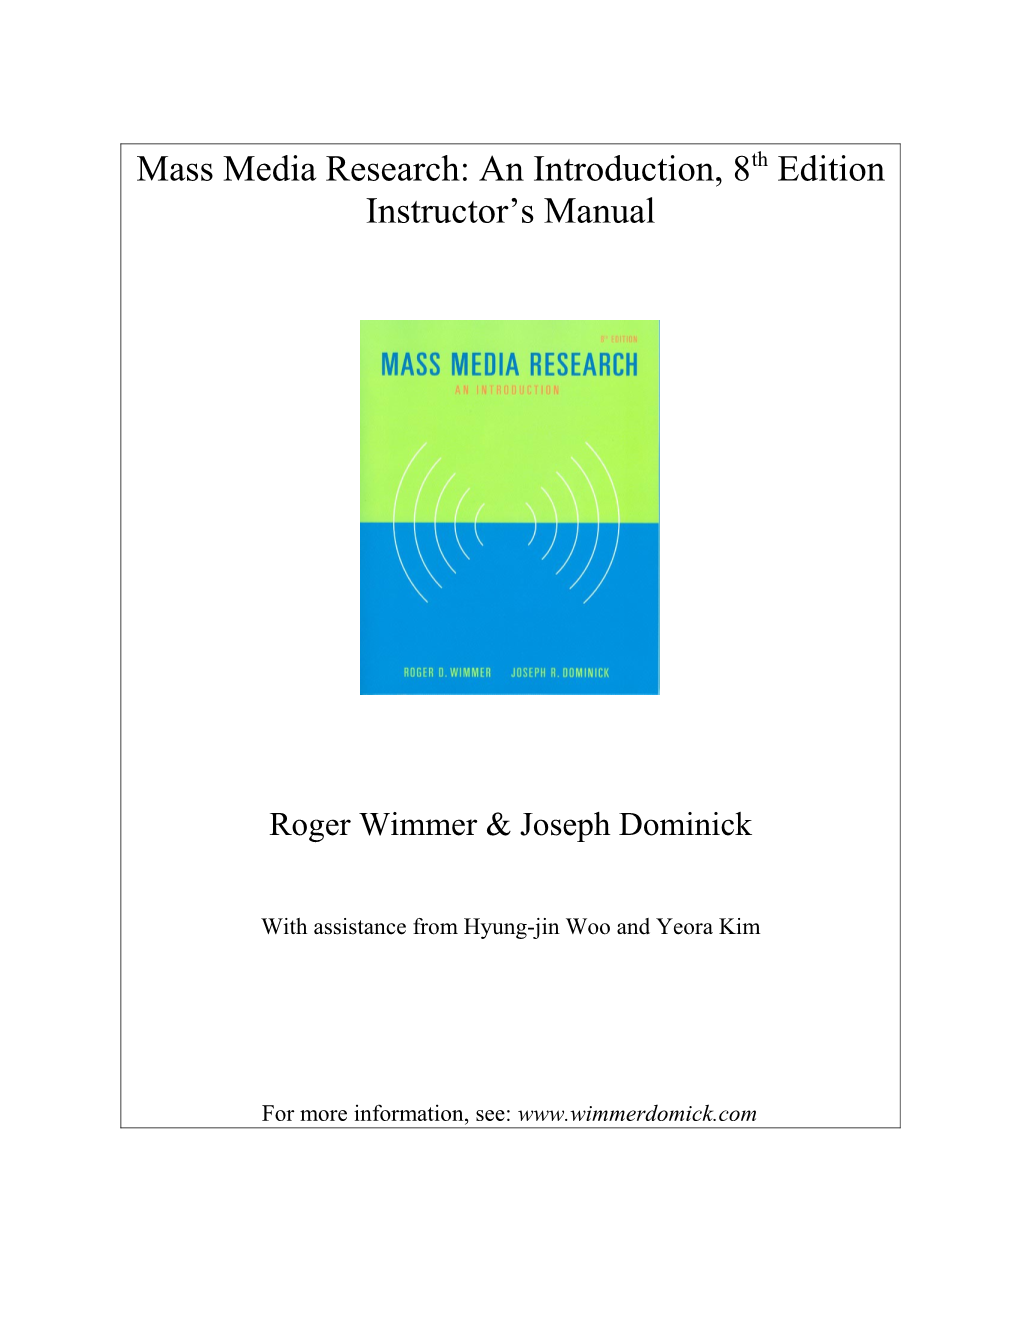 MMR 8Th Edition Instructor's Manual